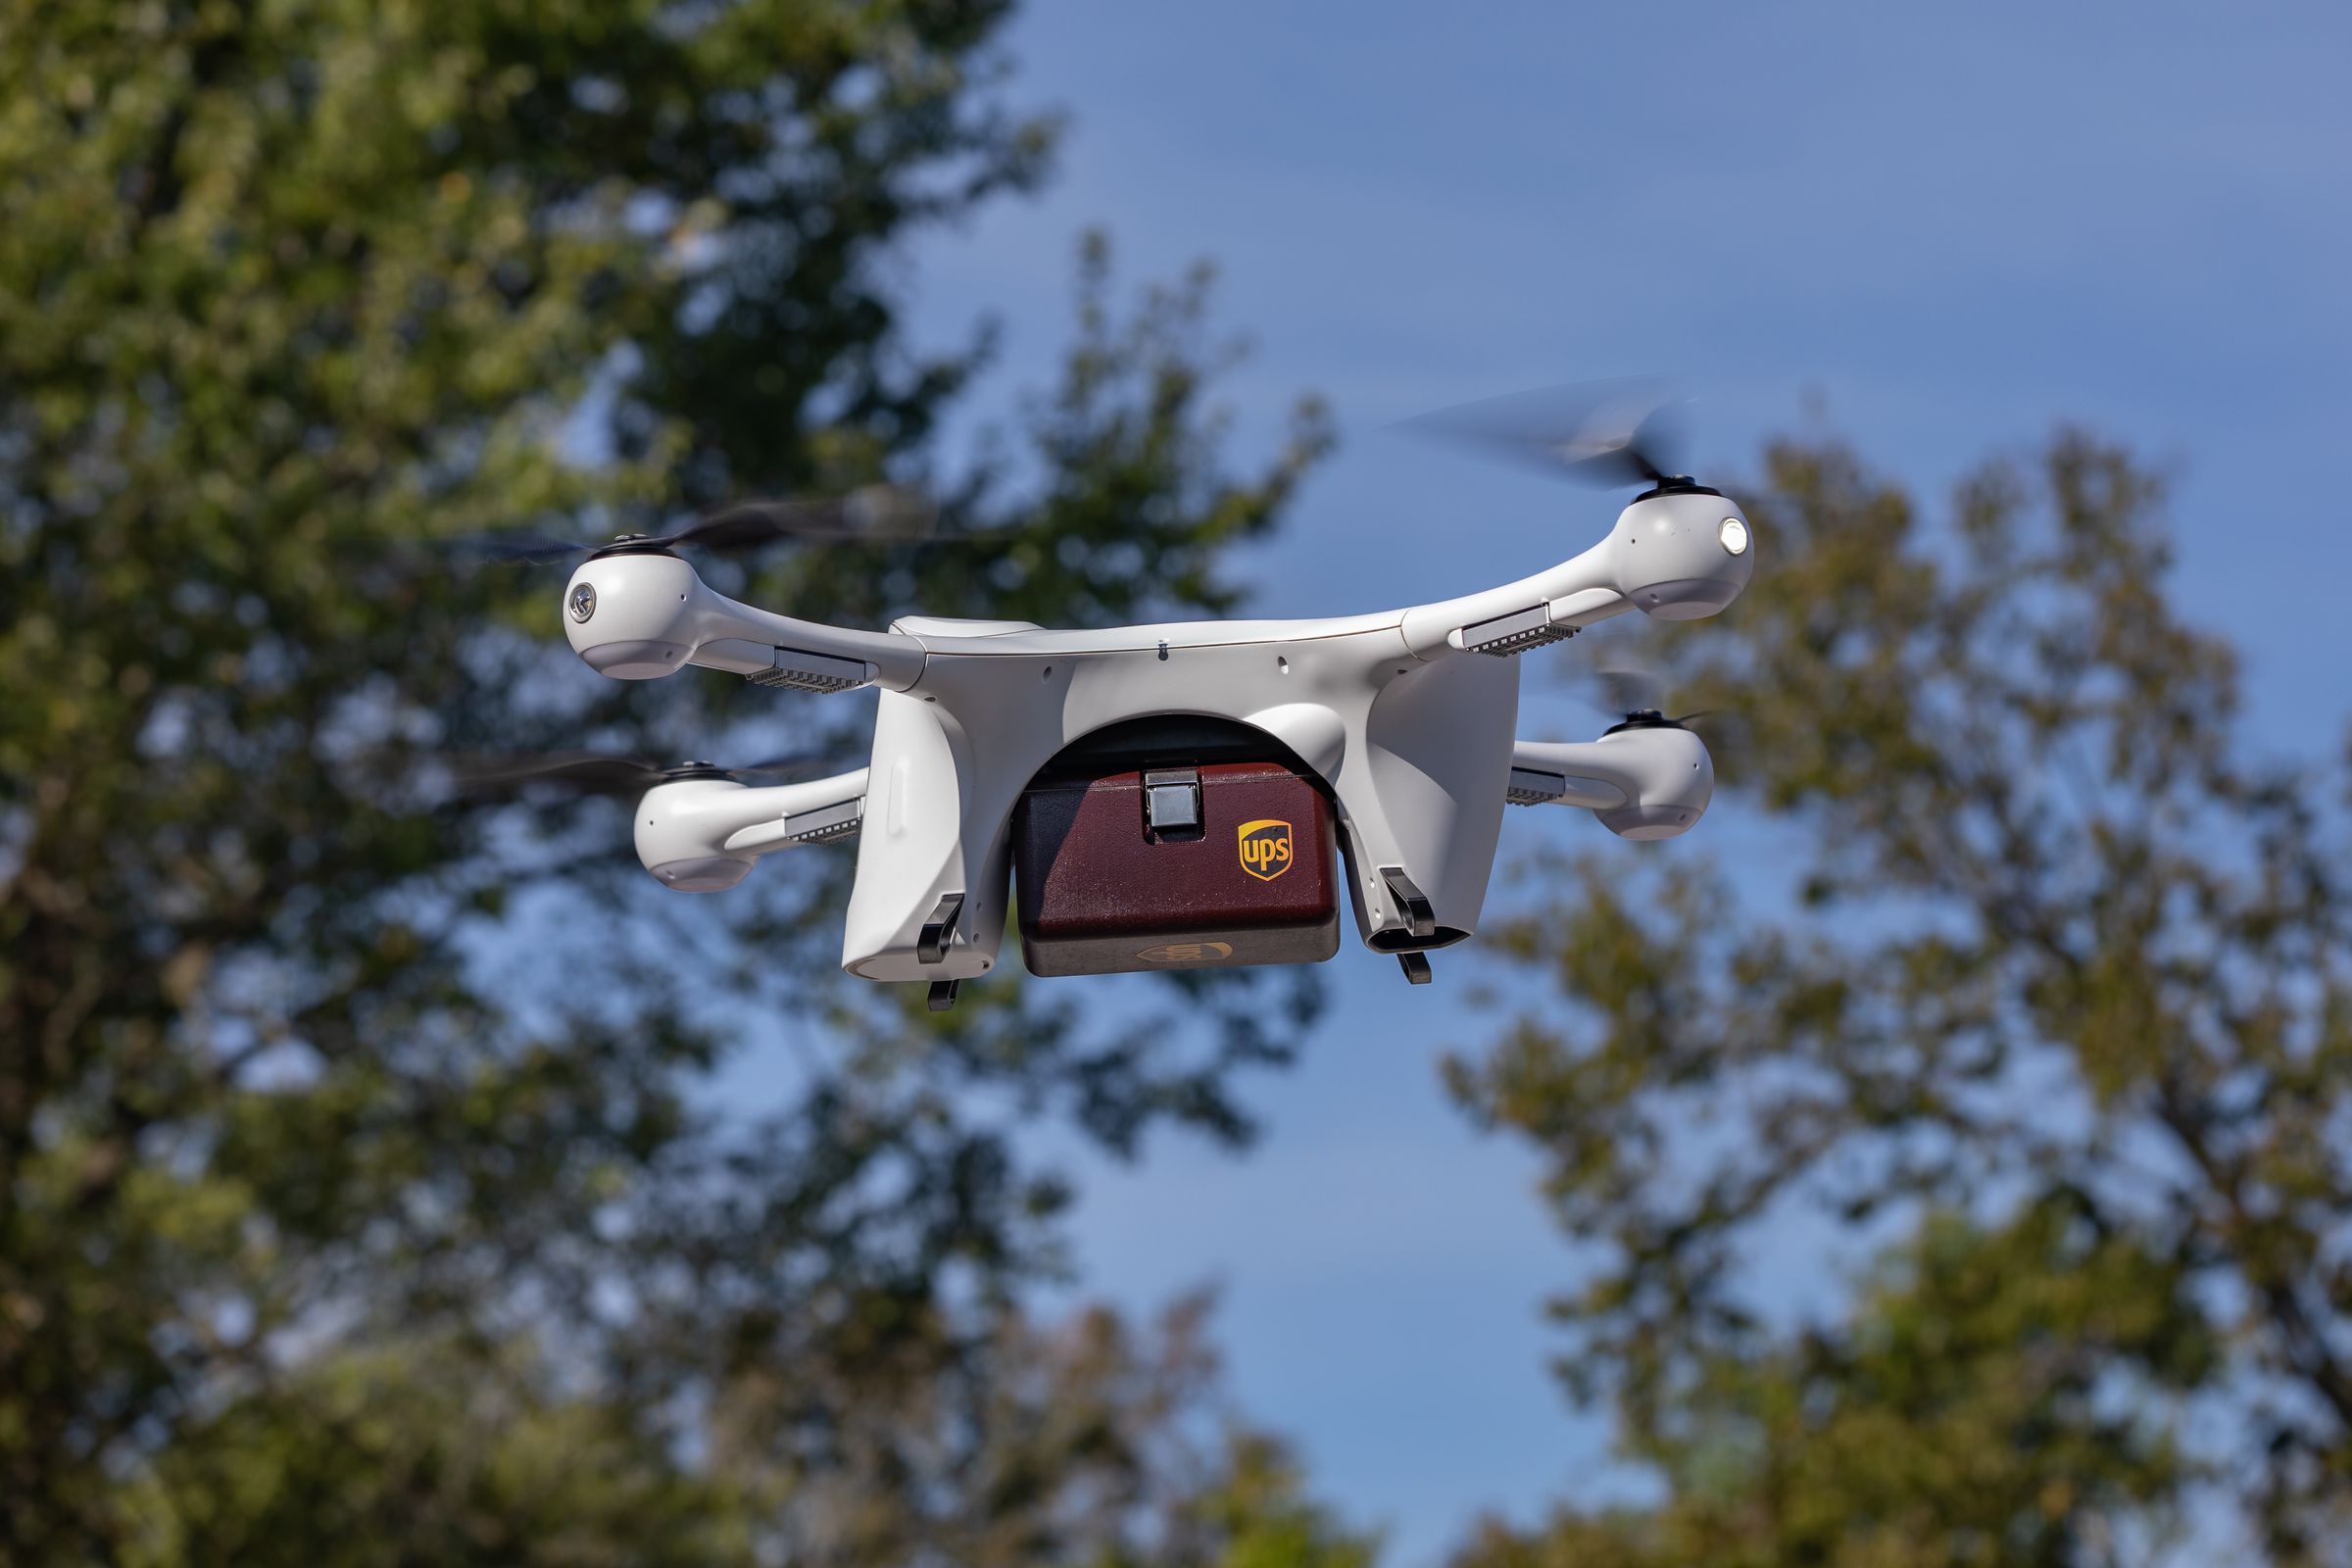 A UPS delivery drone flying in the sky against a tree.